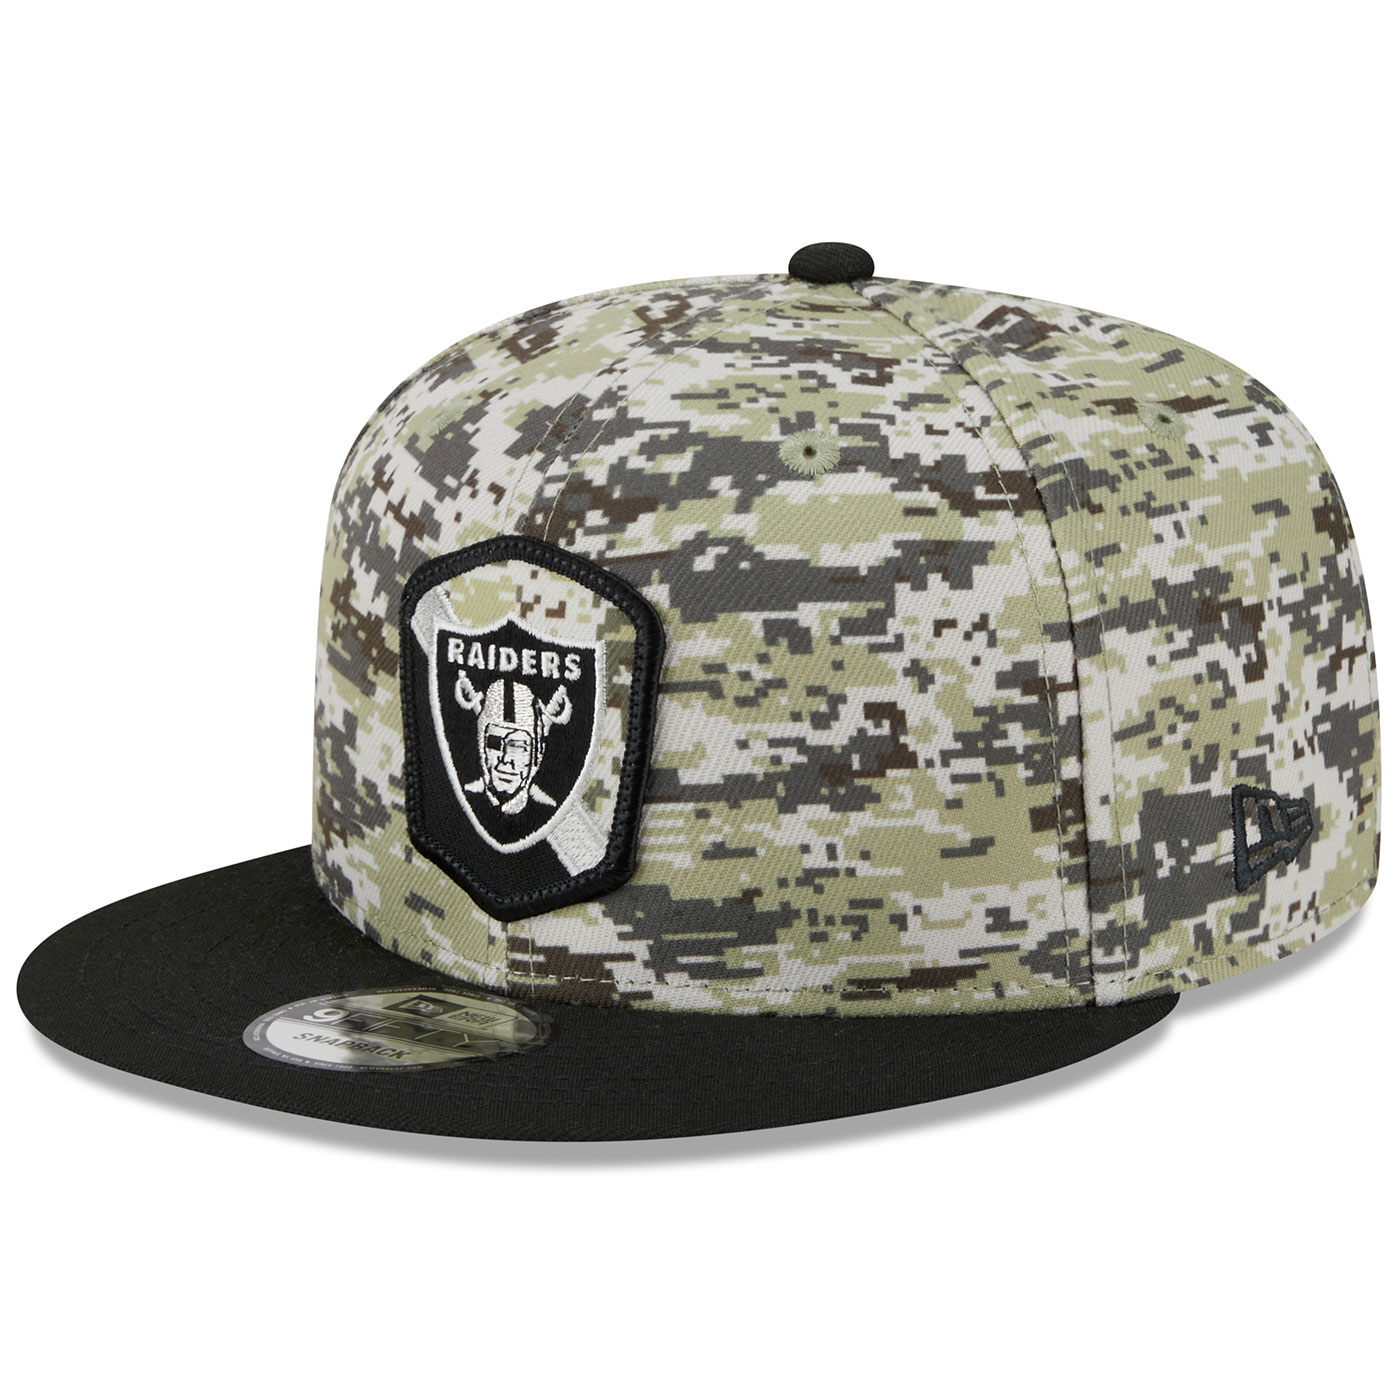 New Era NFL Logo Salute to Service 2020 39Thirty Stretch Cap, CURVED HATS, CAPS